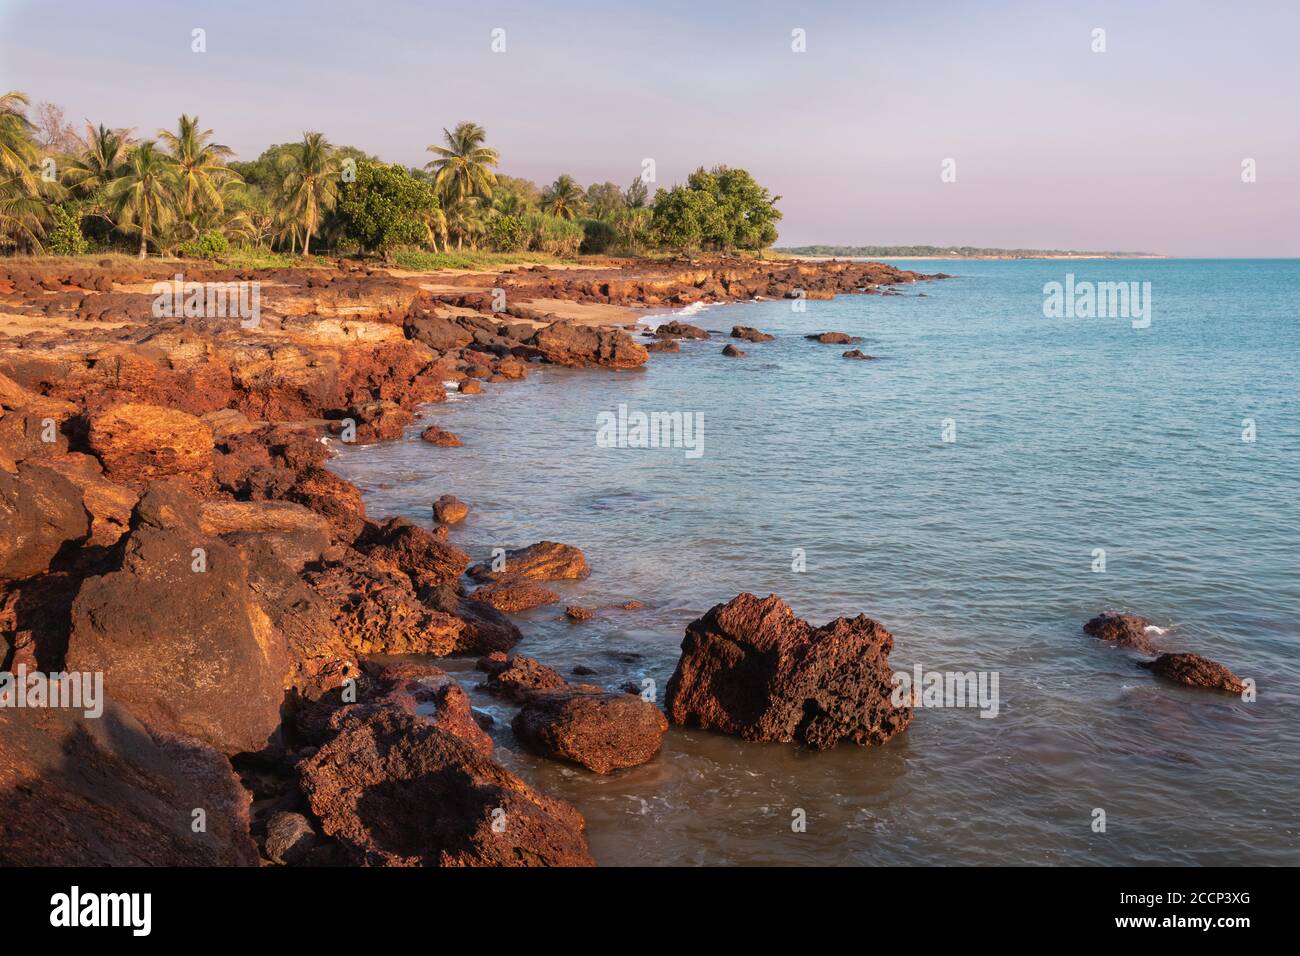 Unspoiled beach at sunset time. Rocky landscape, green trees and palm trees. Coastline of Timor sea. No people in the picture. Dundee Beach. Australia Stock Photo